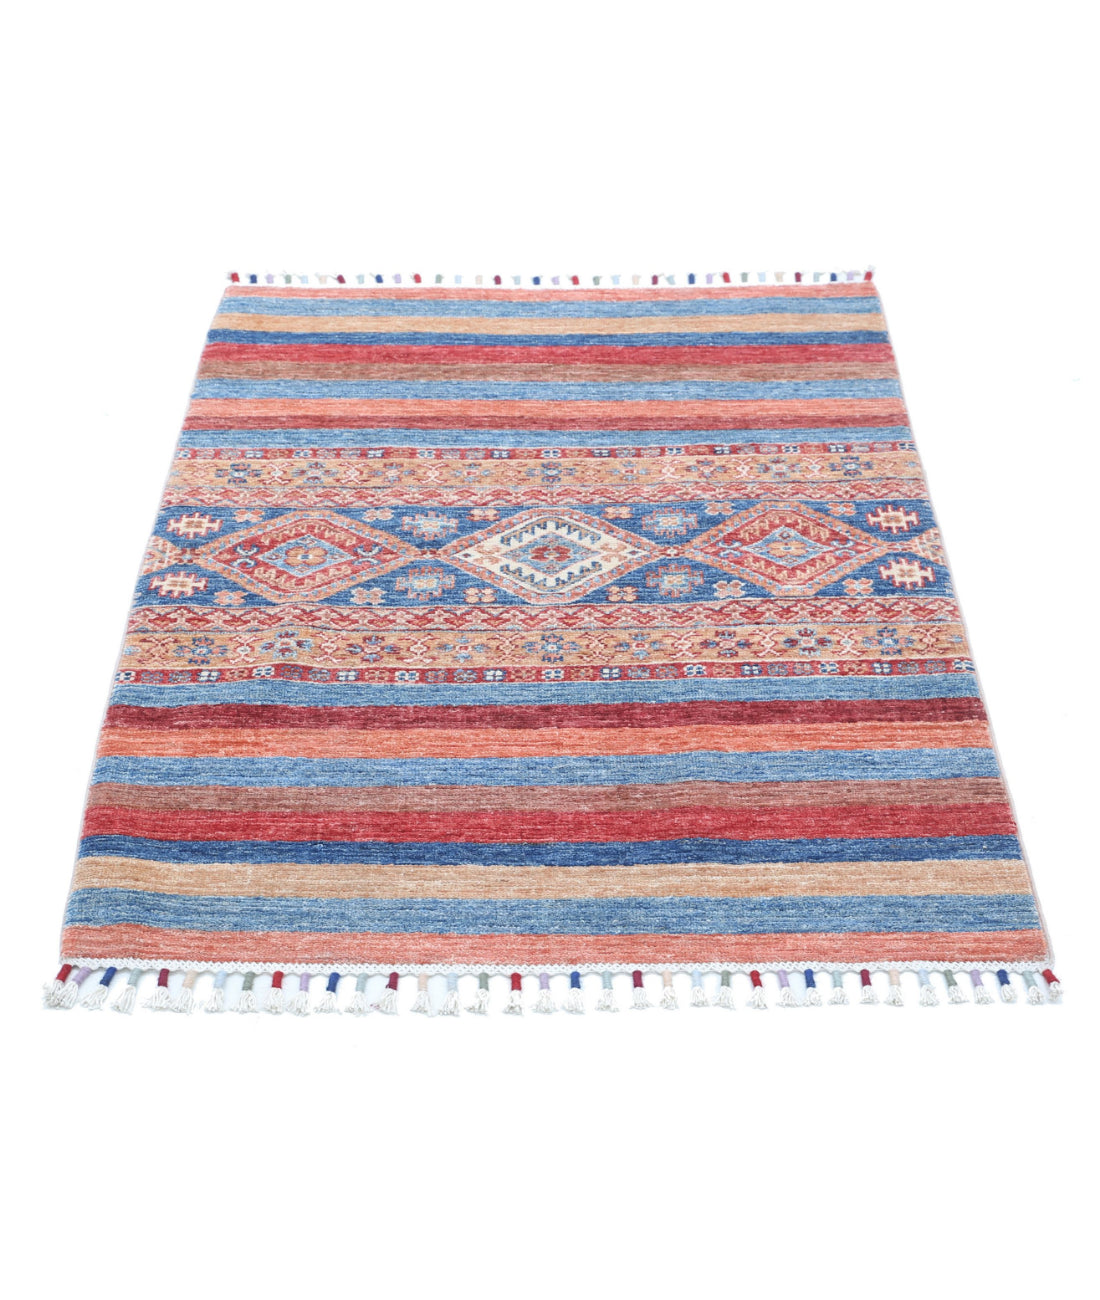 Hand Knotted Khurjeen Wool Rug - 2'9'' x 3'10'' 2'9'' x 3'10'' (83 X 115) / Multi / Multi